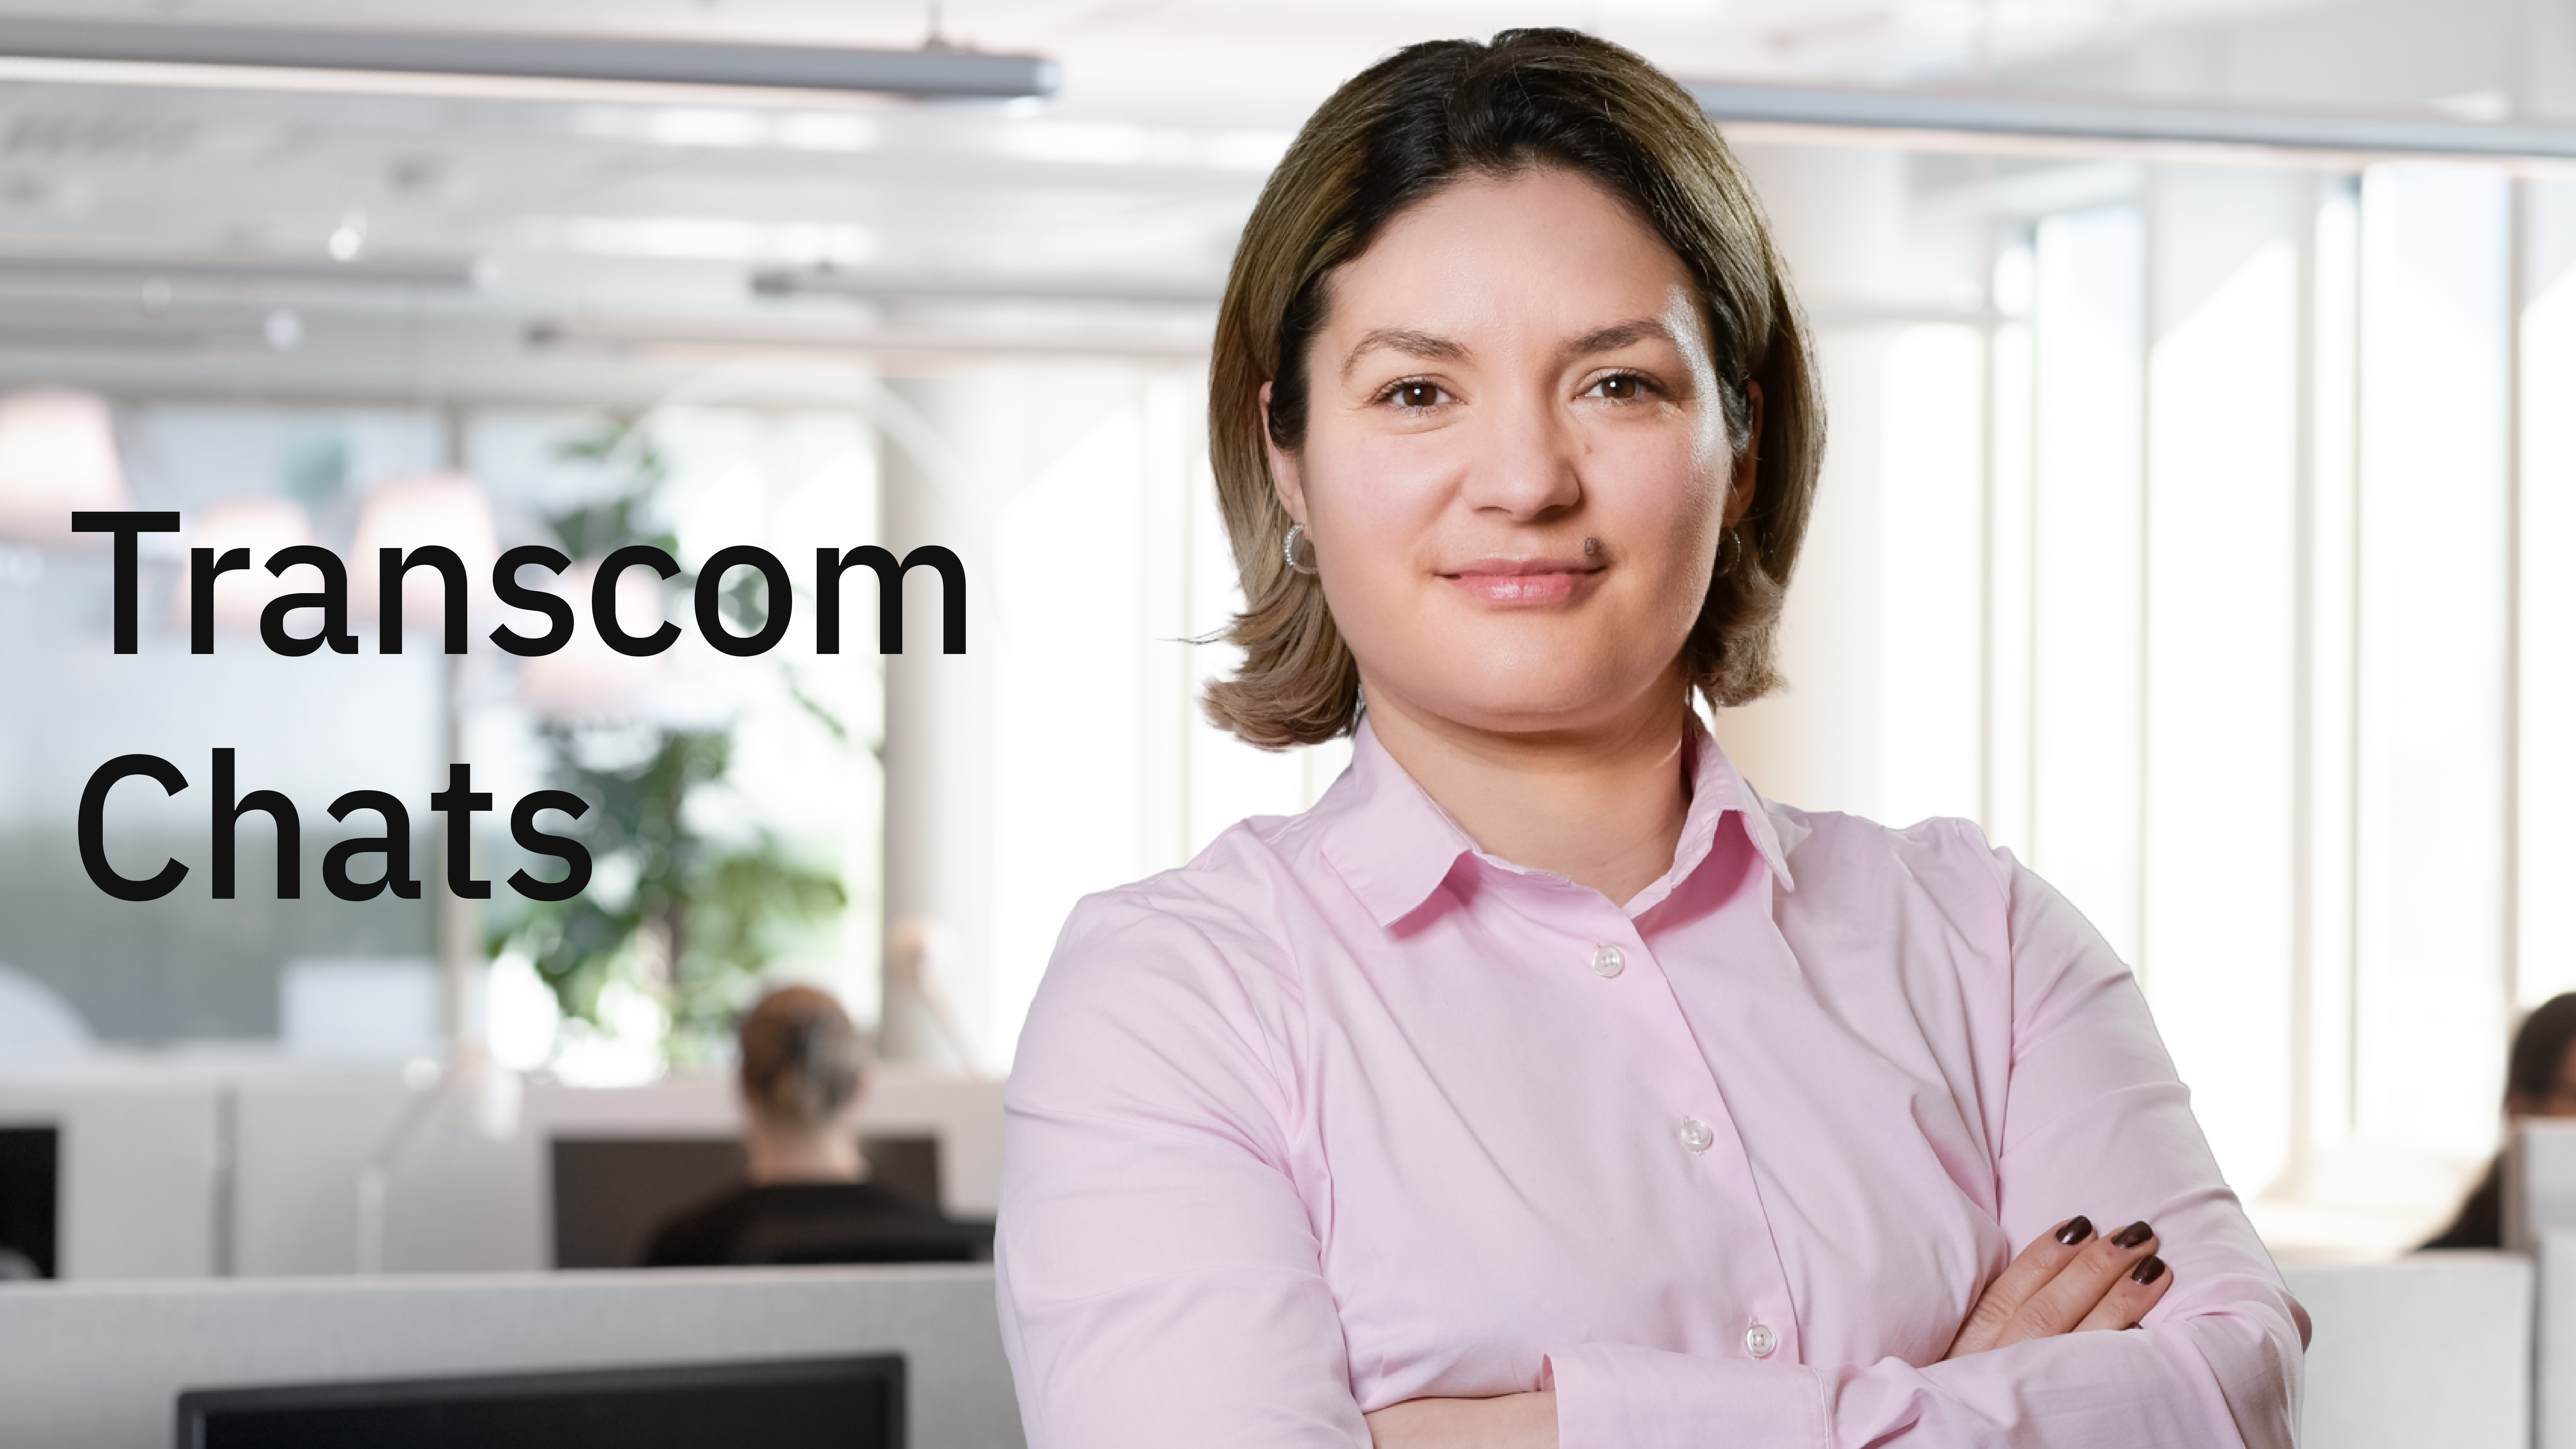 Woman in an office setting looking proud and happy